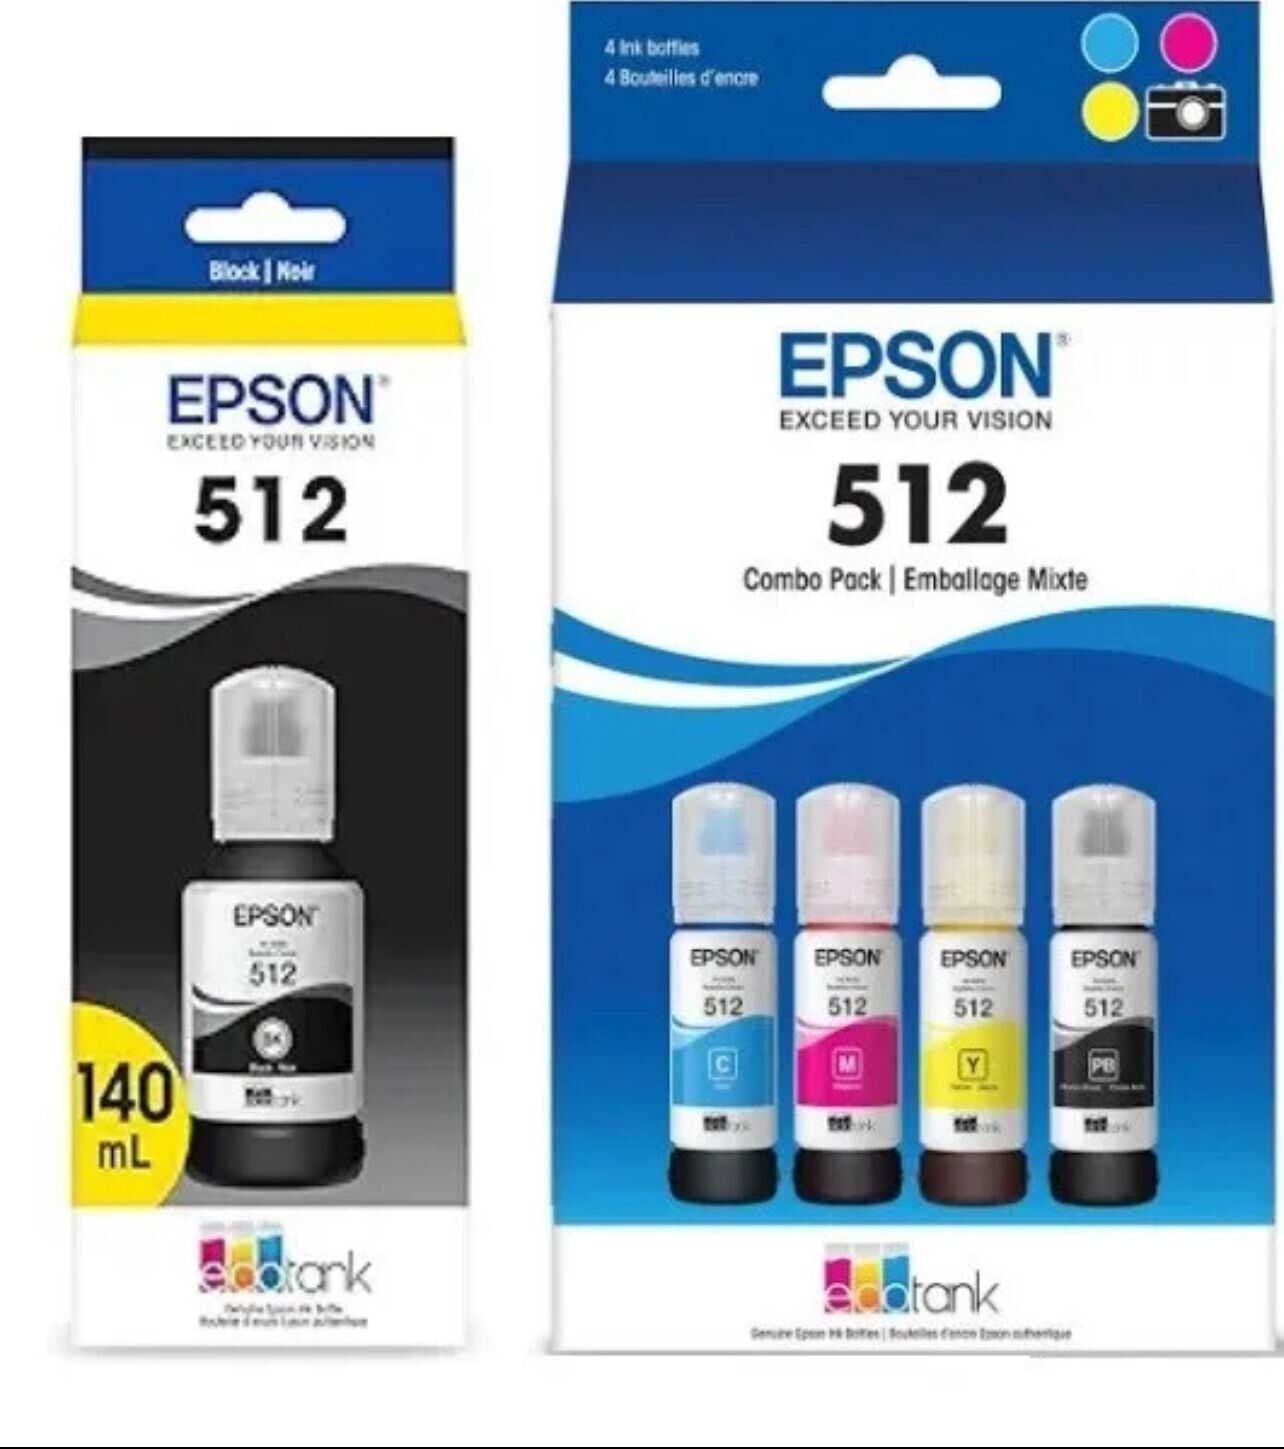 EPSON 512 EcoTank Genuine Ink Ultra-high Capacity Bottle Black and Color Combo